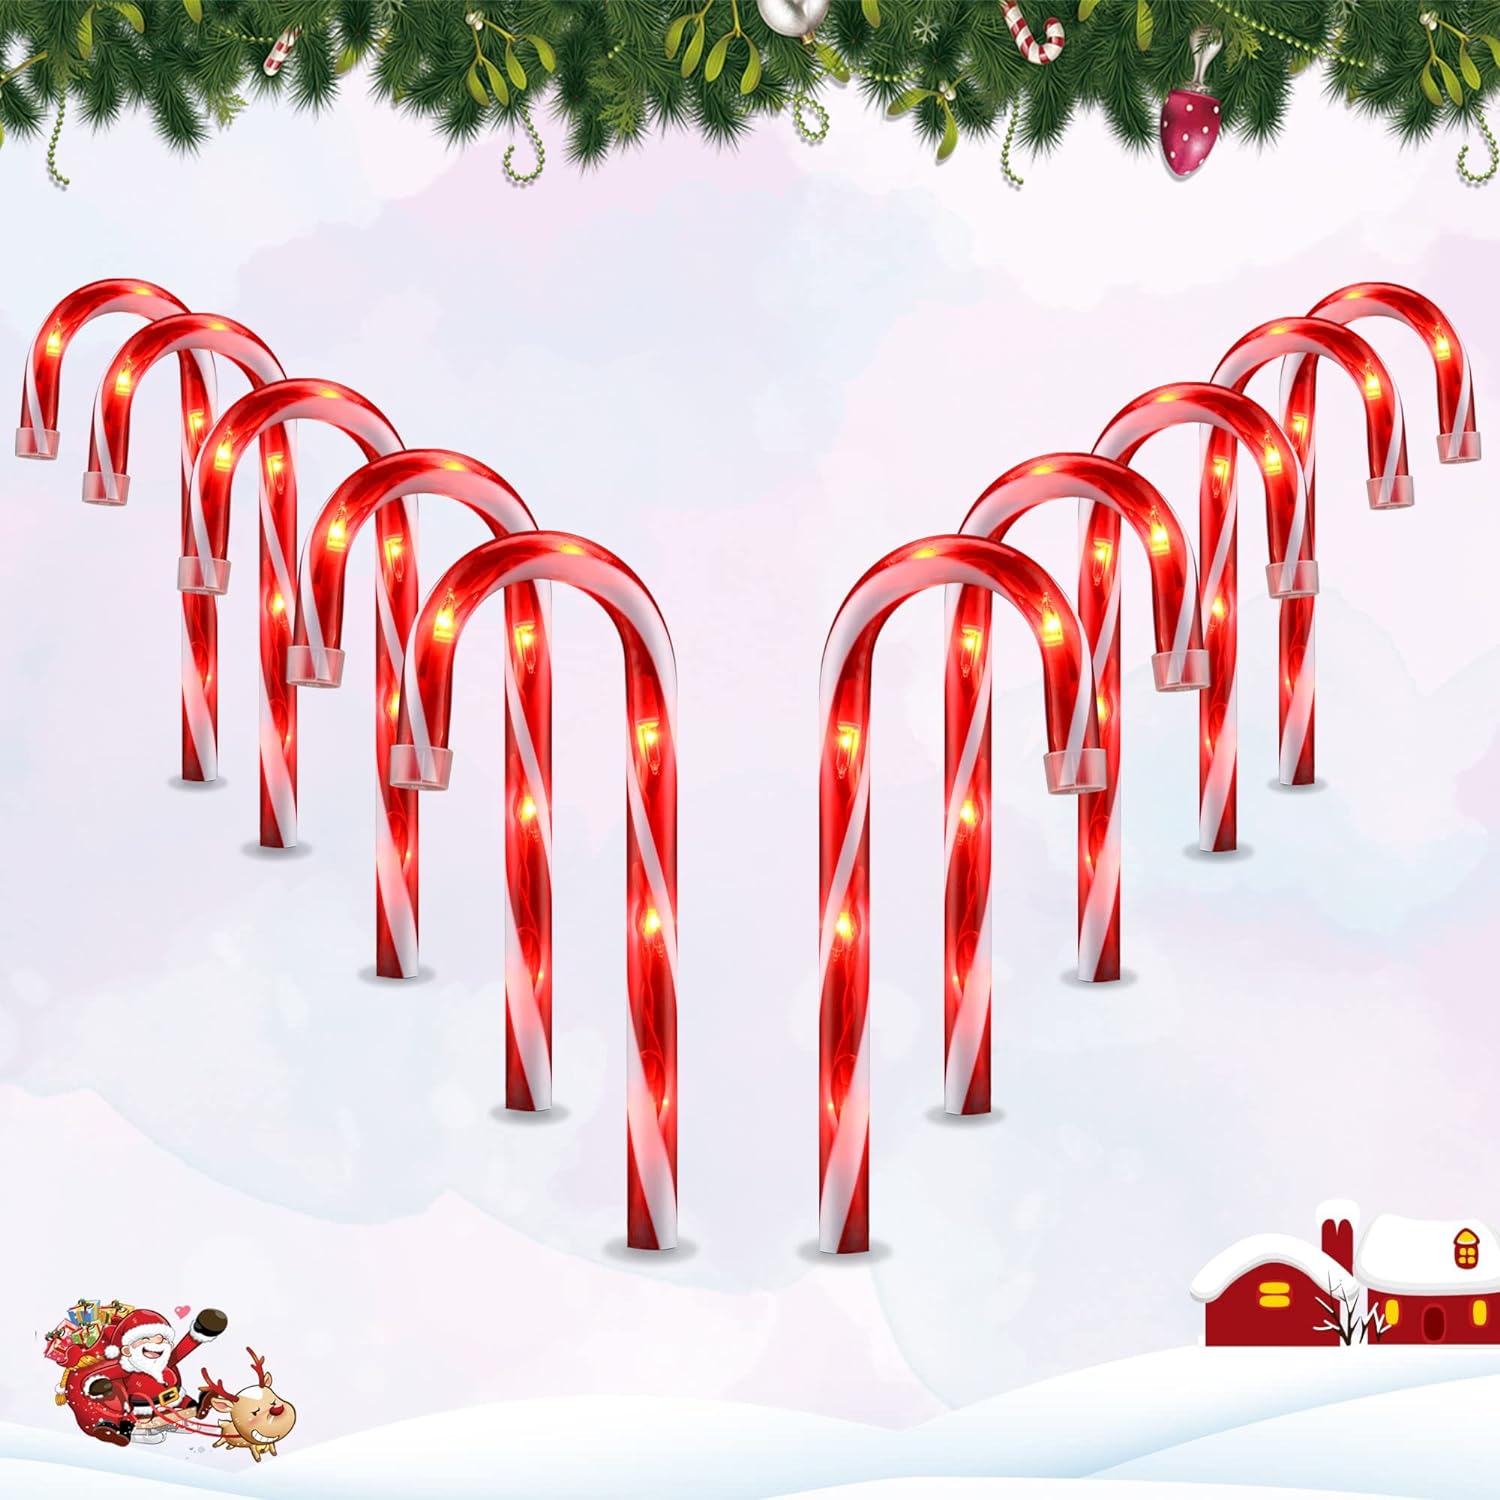 VCOKEN 10'' Christmas Candy Cane Pathway Markers Lights - Set of 10 Christmas Stakes Lights Outdoor Pathway Decorations, Connectable